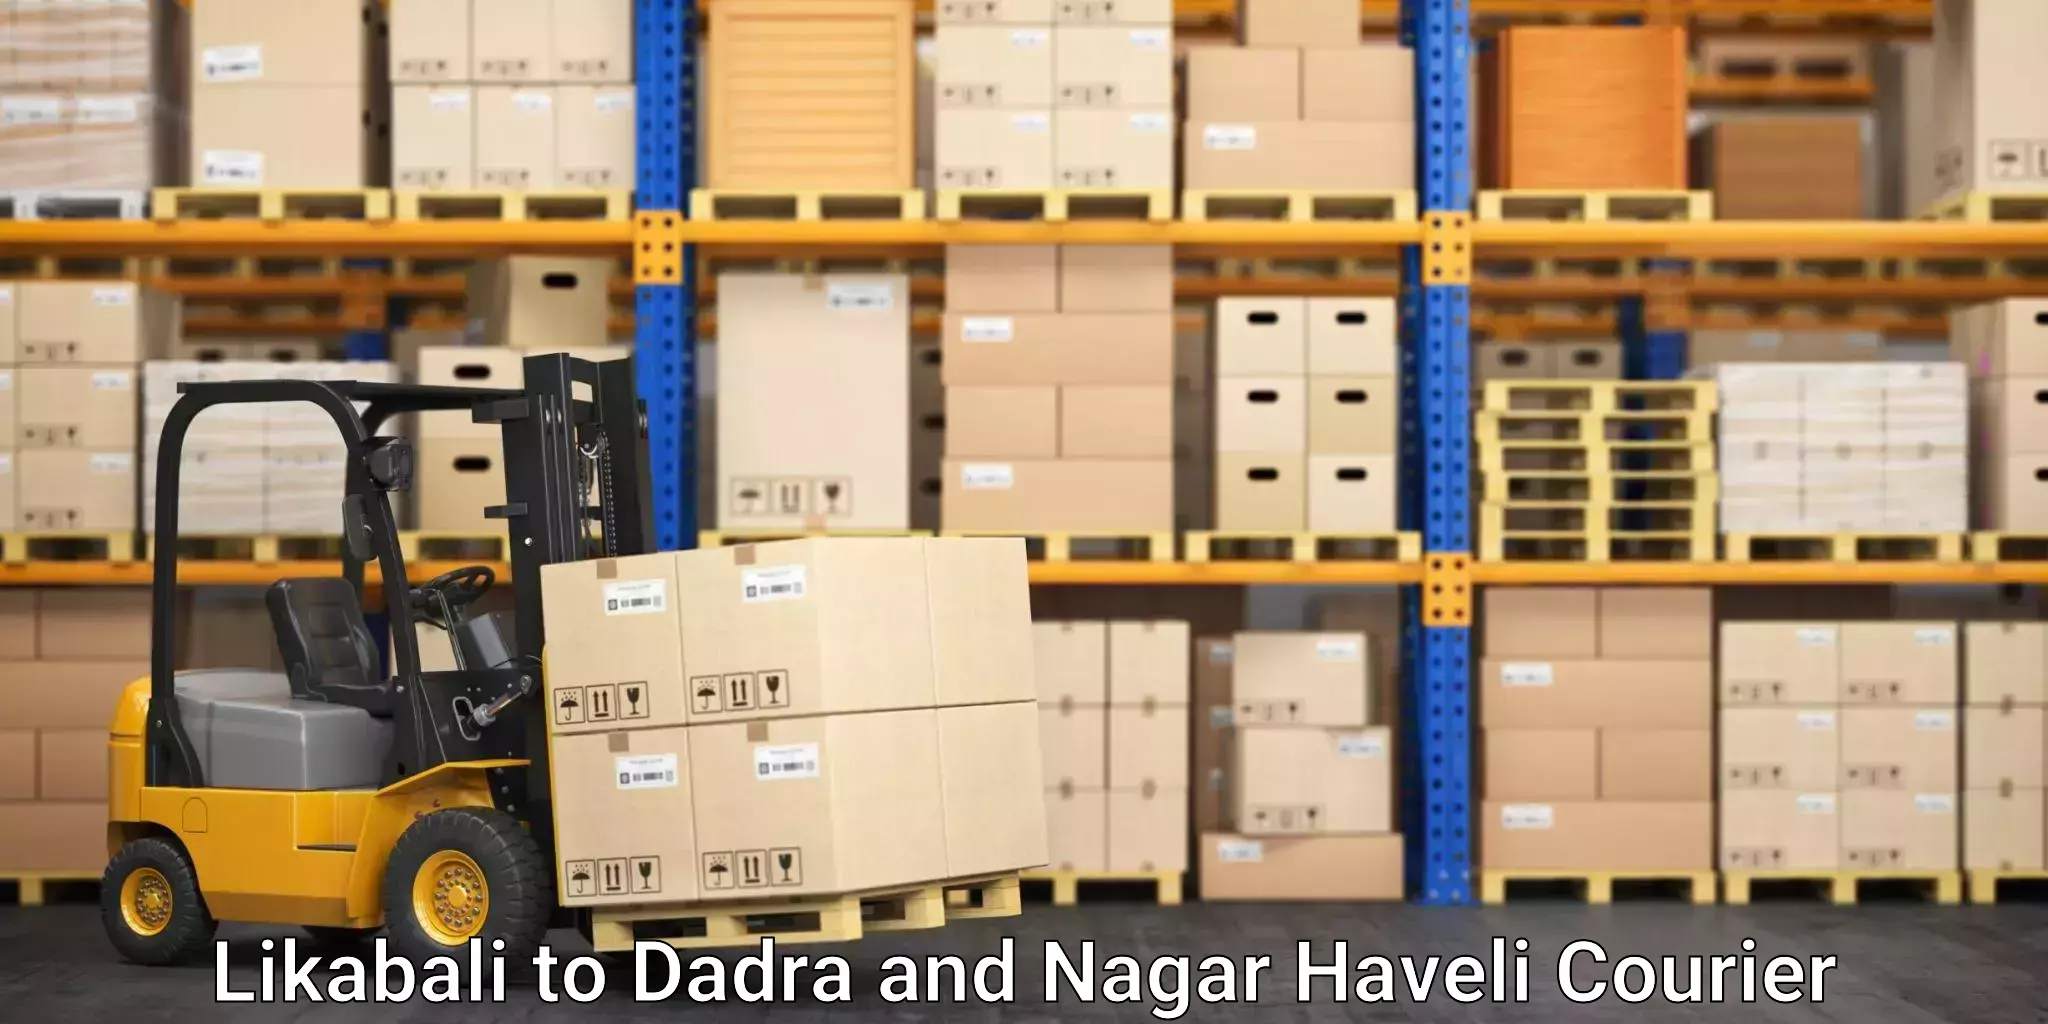 Multi-service courier options in Likabali to Dadra and Nagar Haveli